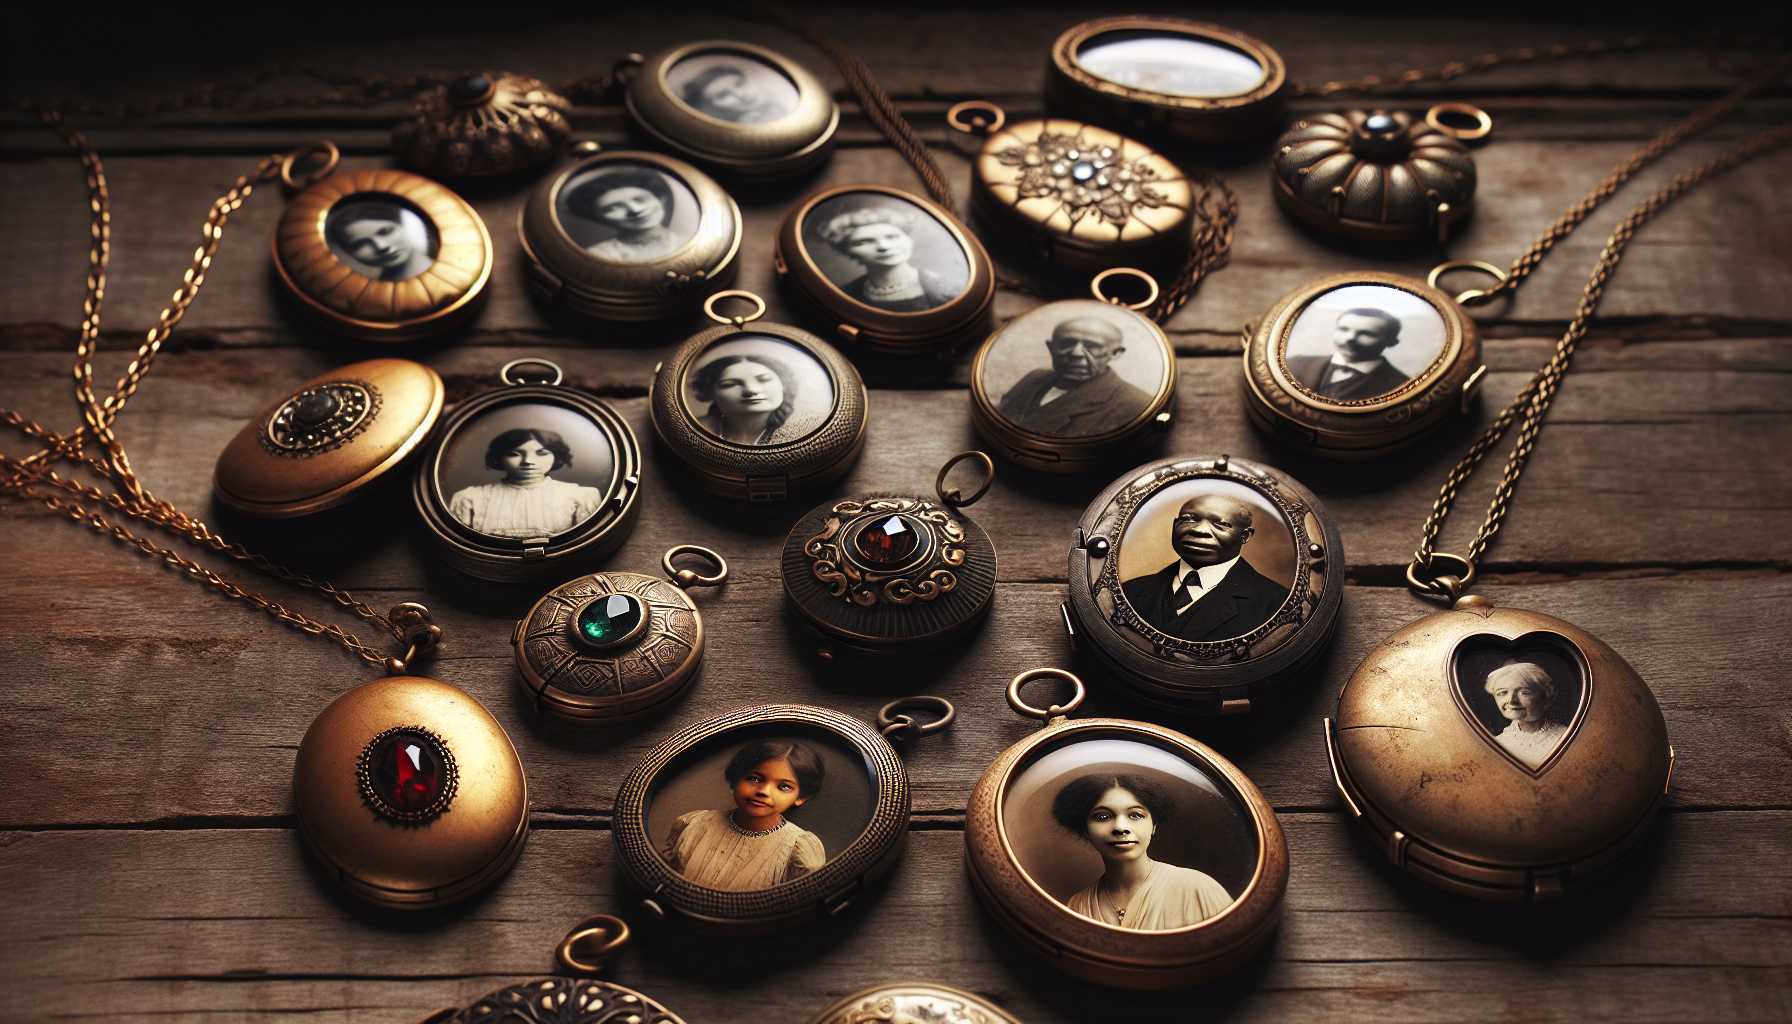 Envision an antique scene: a collection of picture locket pendants elegantly laid out on a vintage wooden table. They exude an air of nostalgia, each housing different cherished memories. Some open to